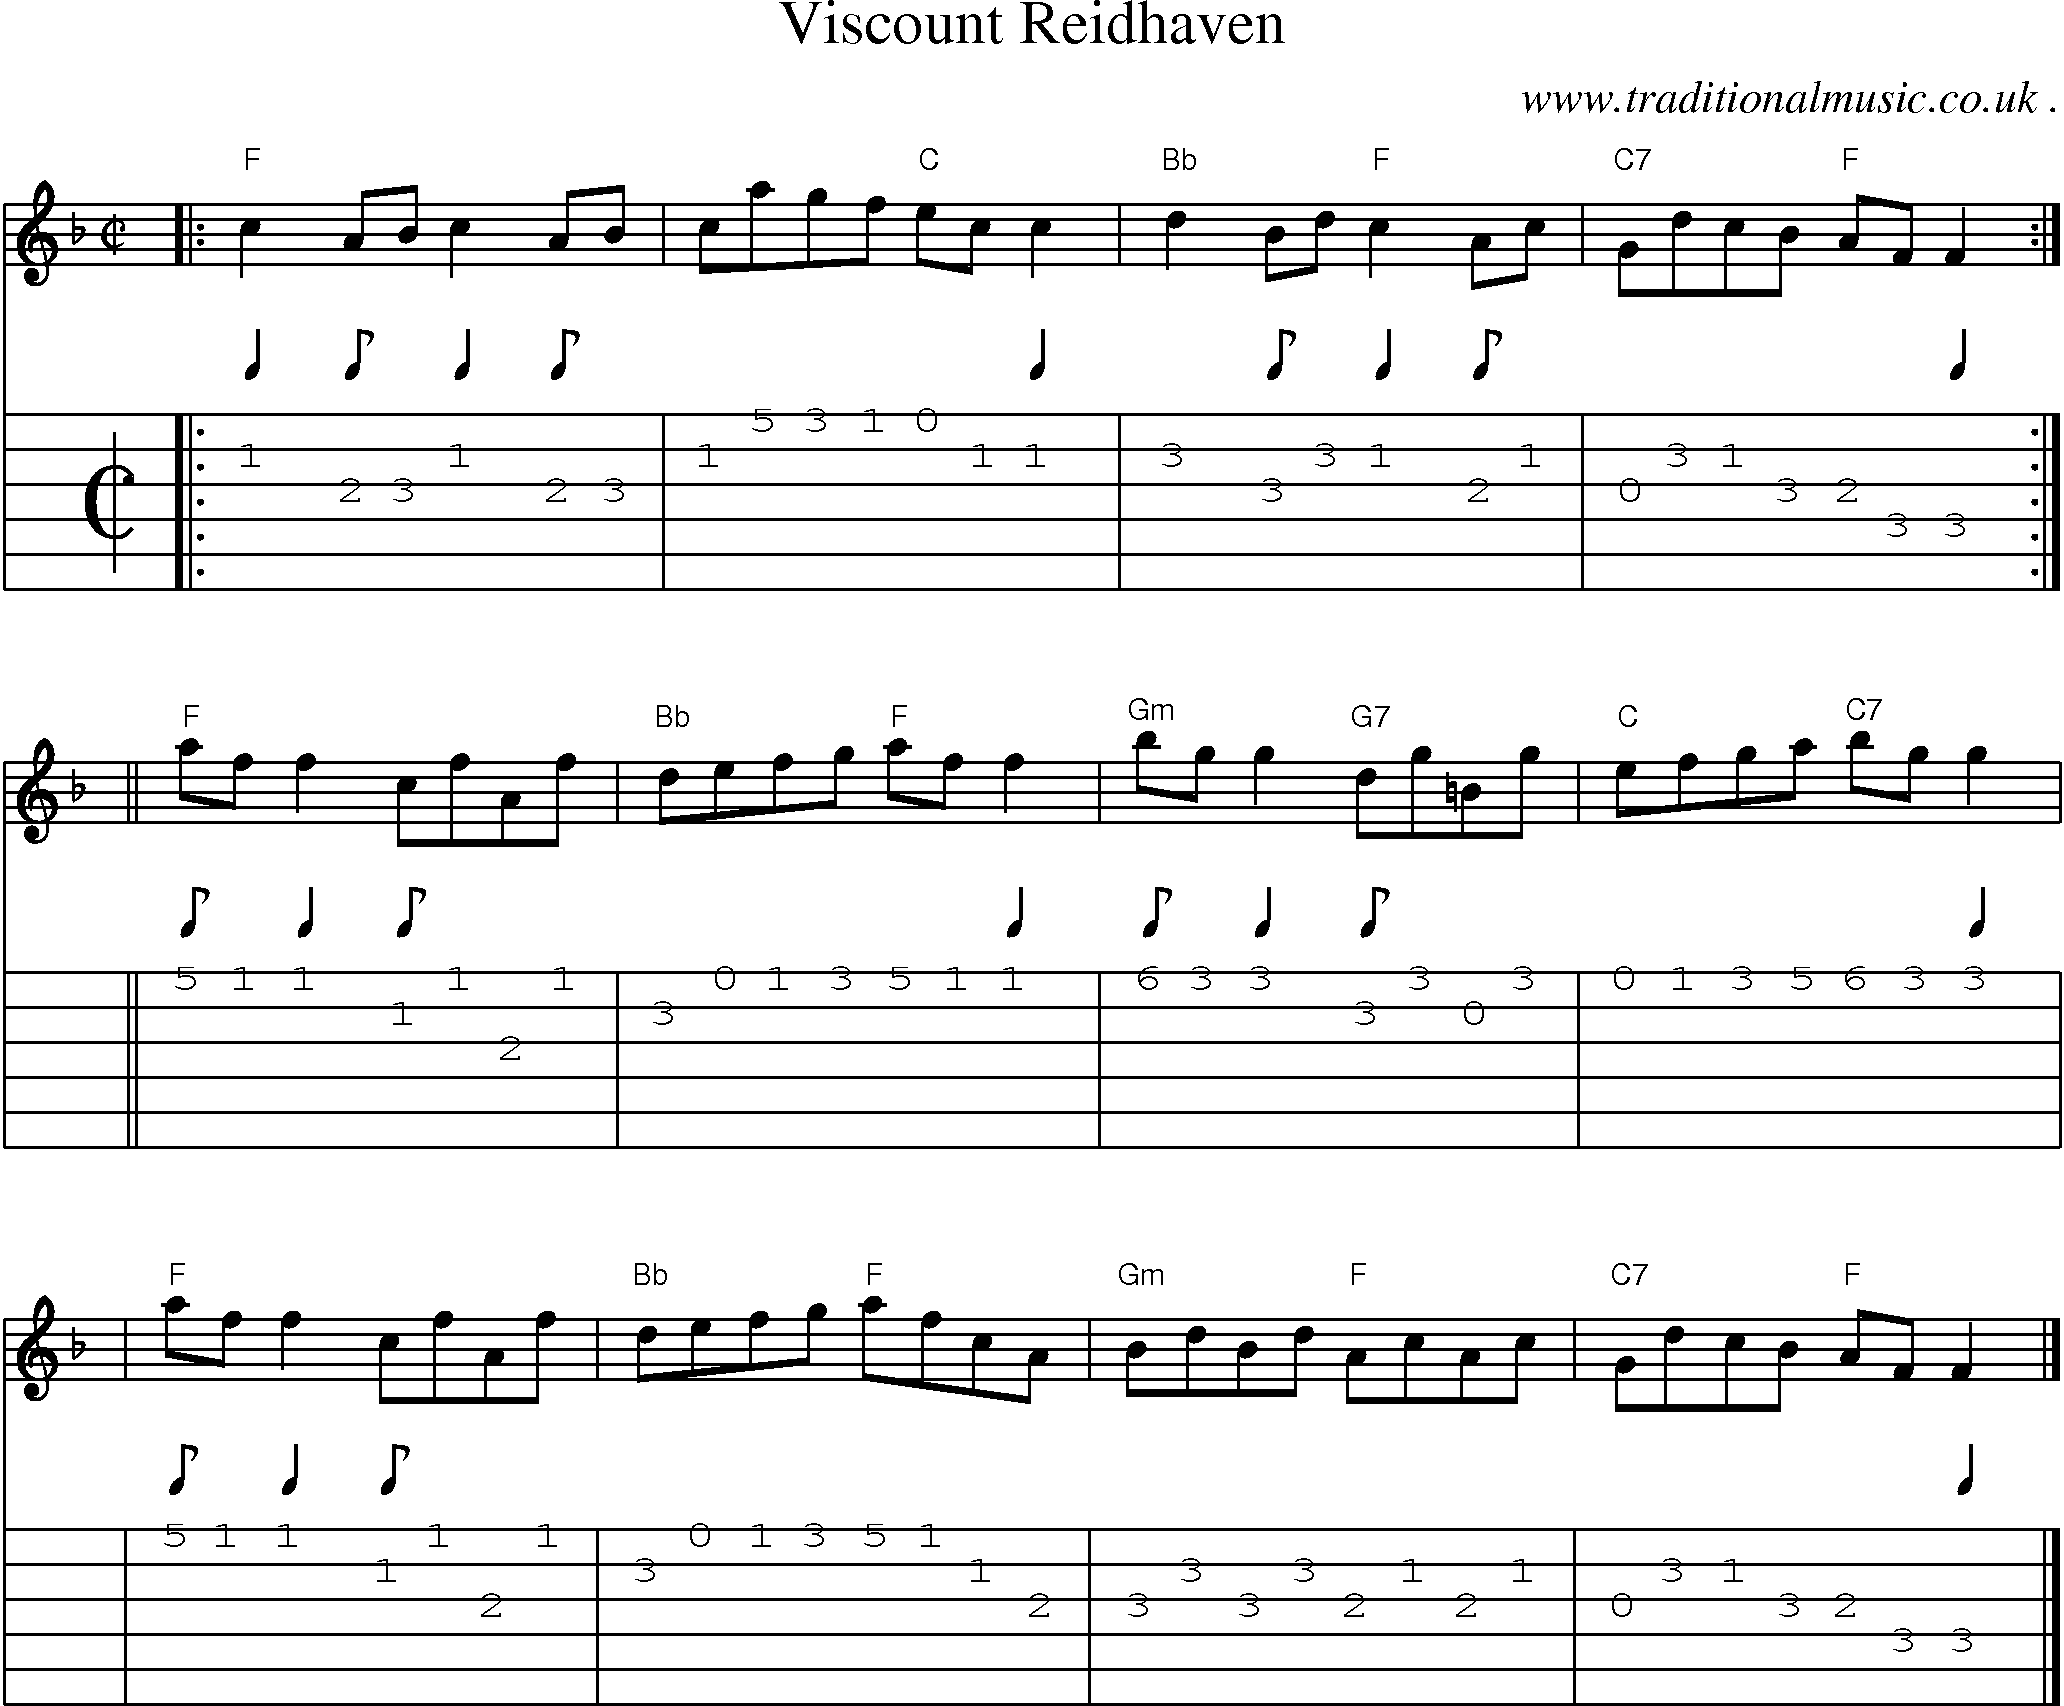 Sheet-music  score, Chords and Guitar Tabs for Viscount Reidhaven